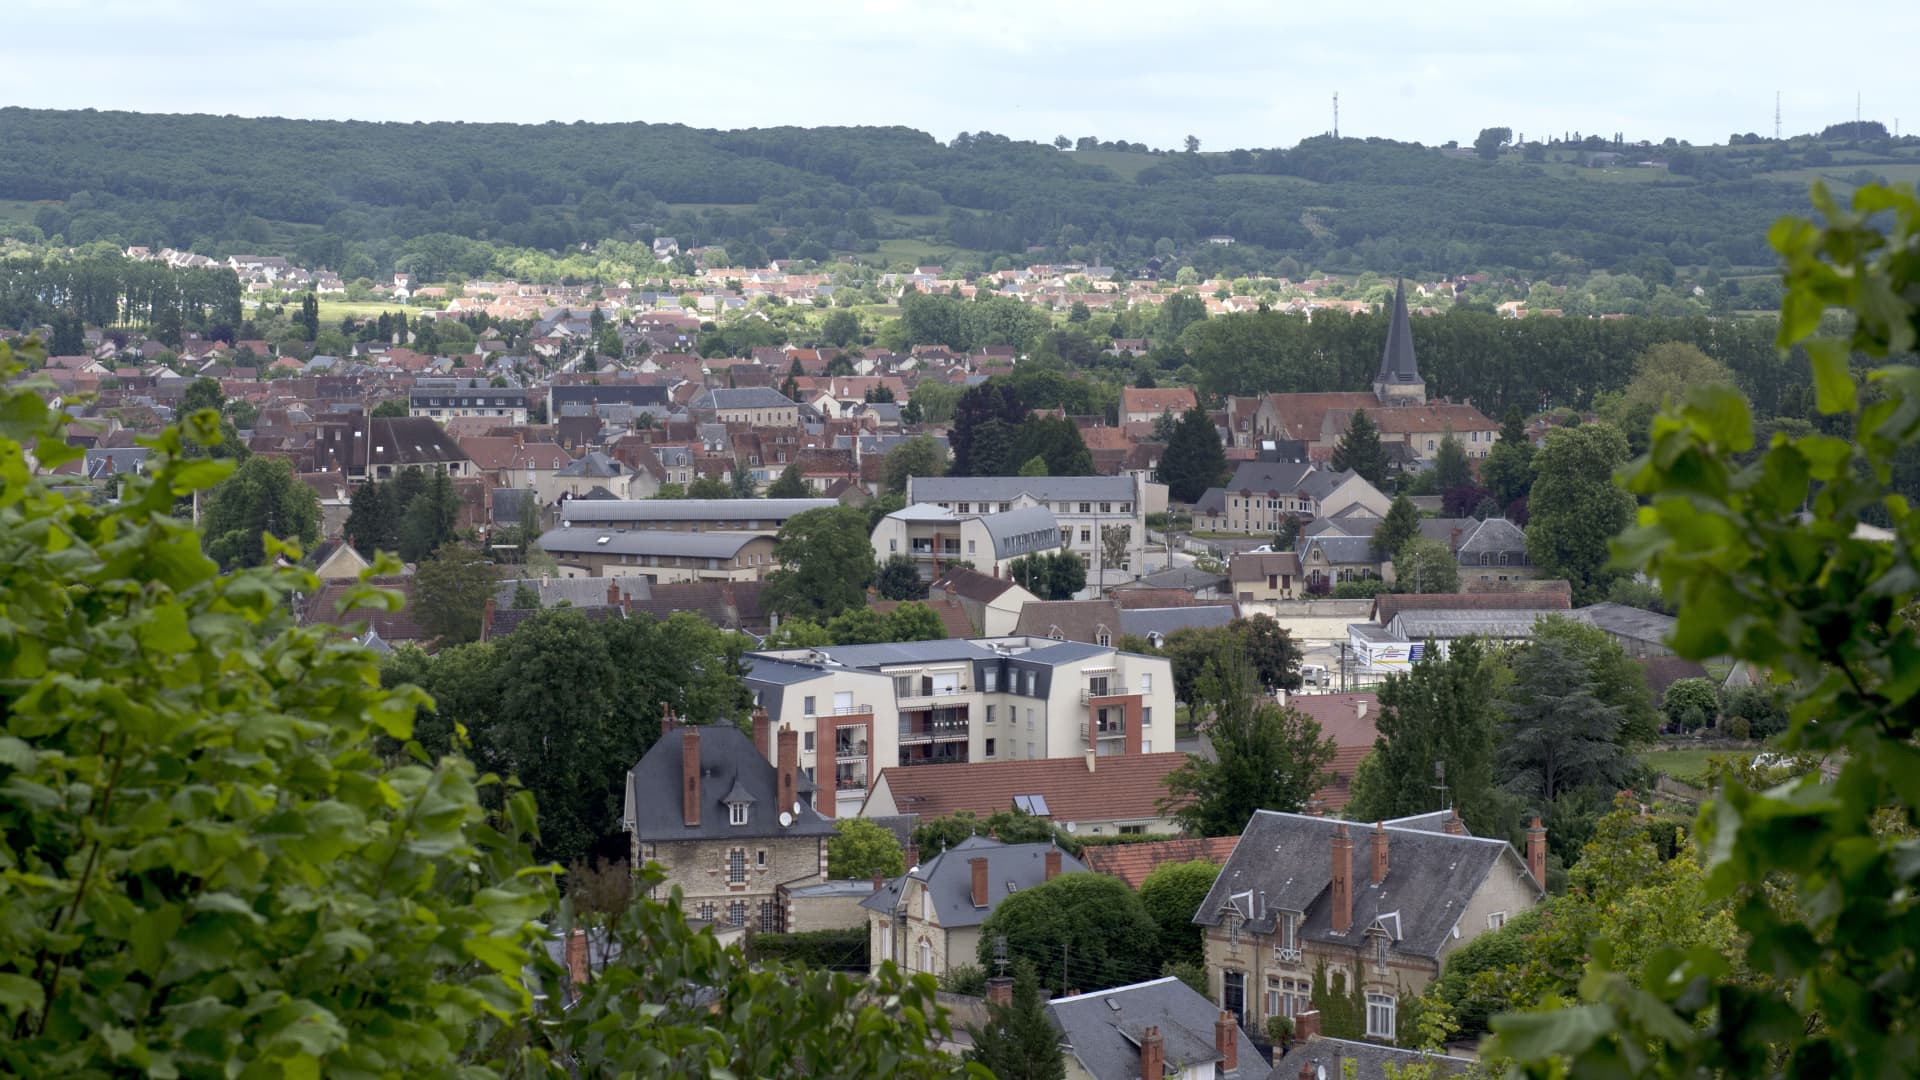 Saint-Amand-Montrond is located in central France and has a population of around 9,000.